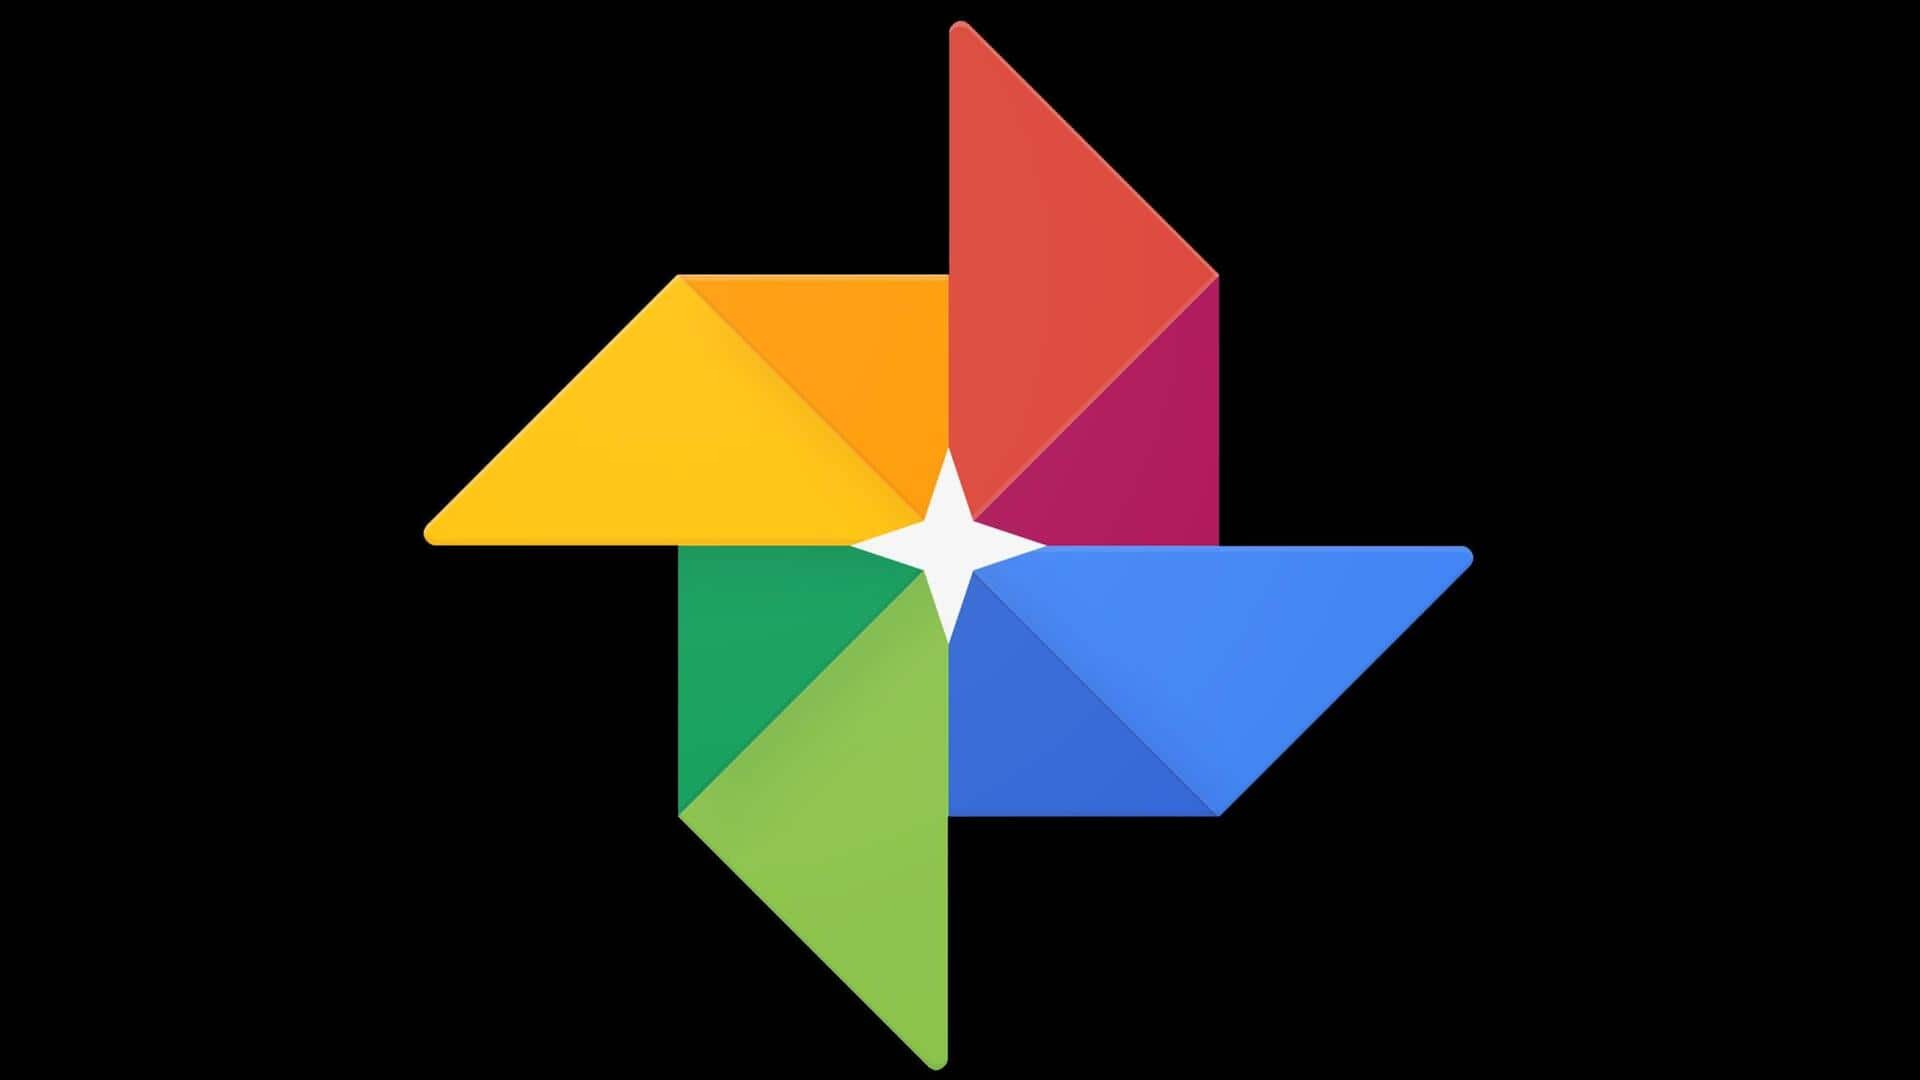 Google Photos rolls out 'Photo Stack' feature: How it works